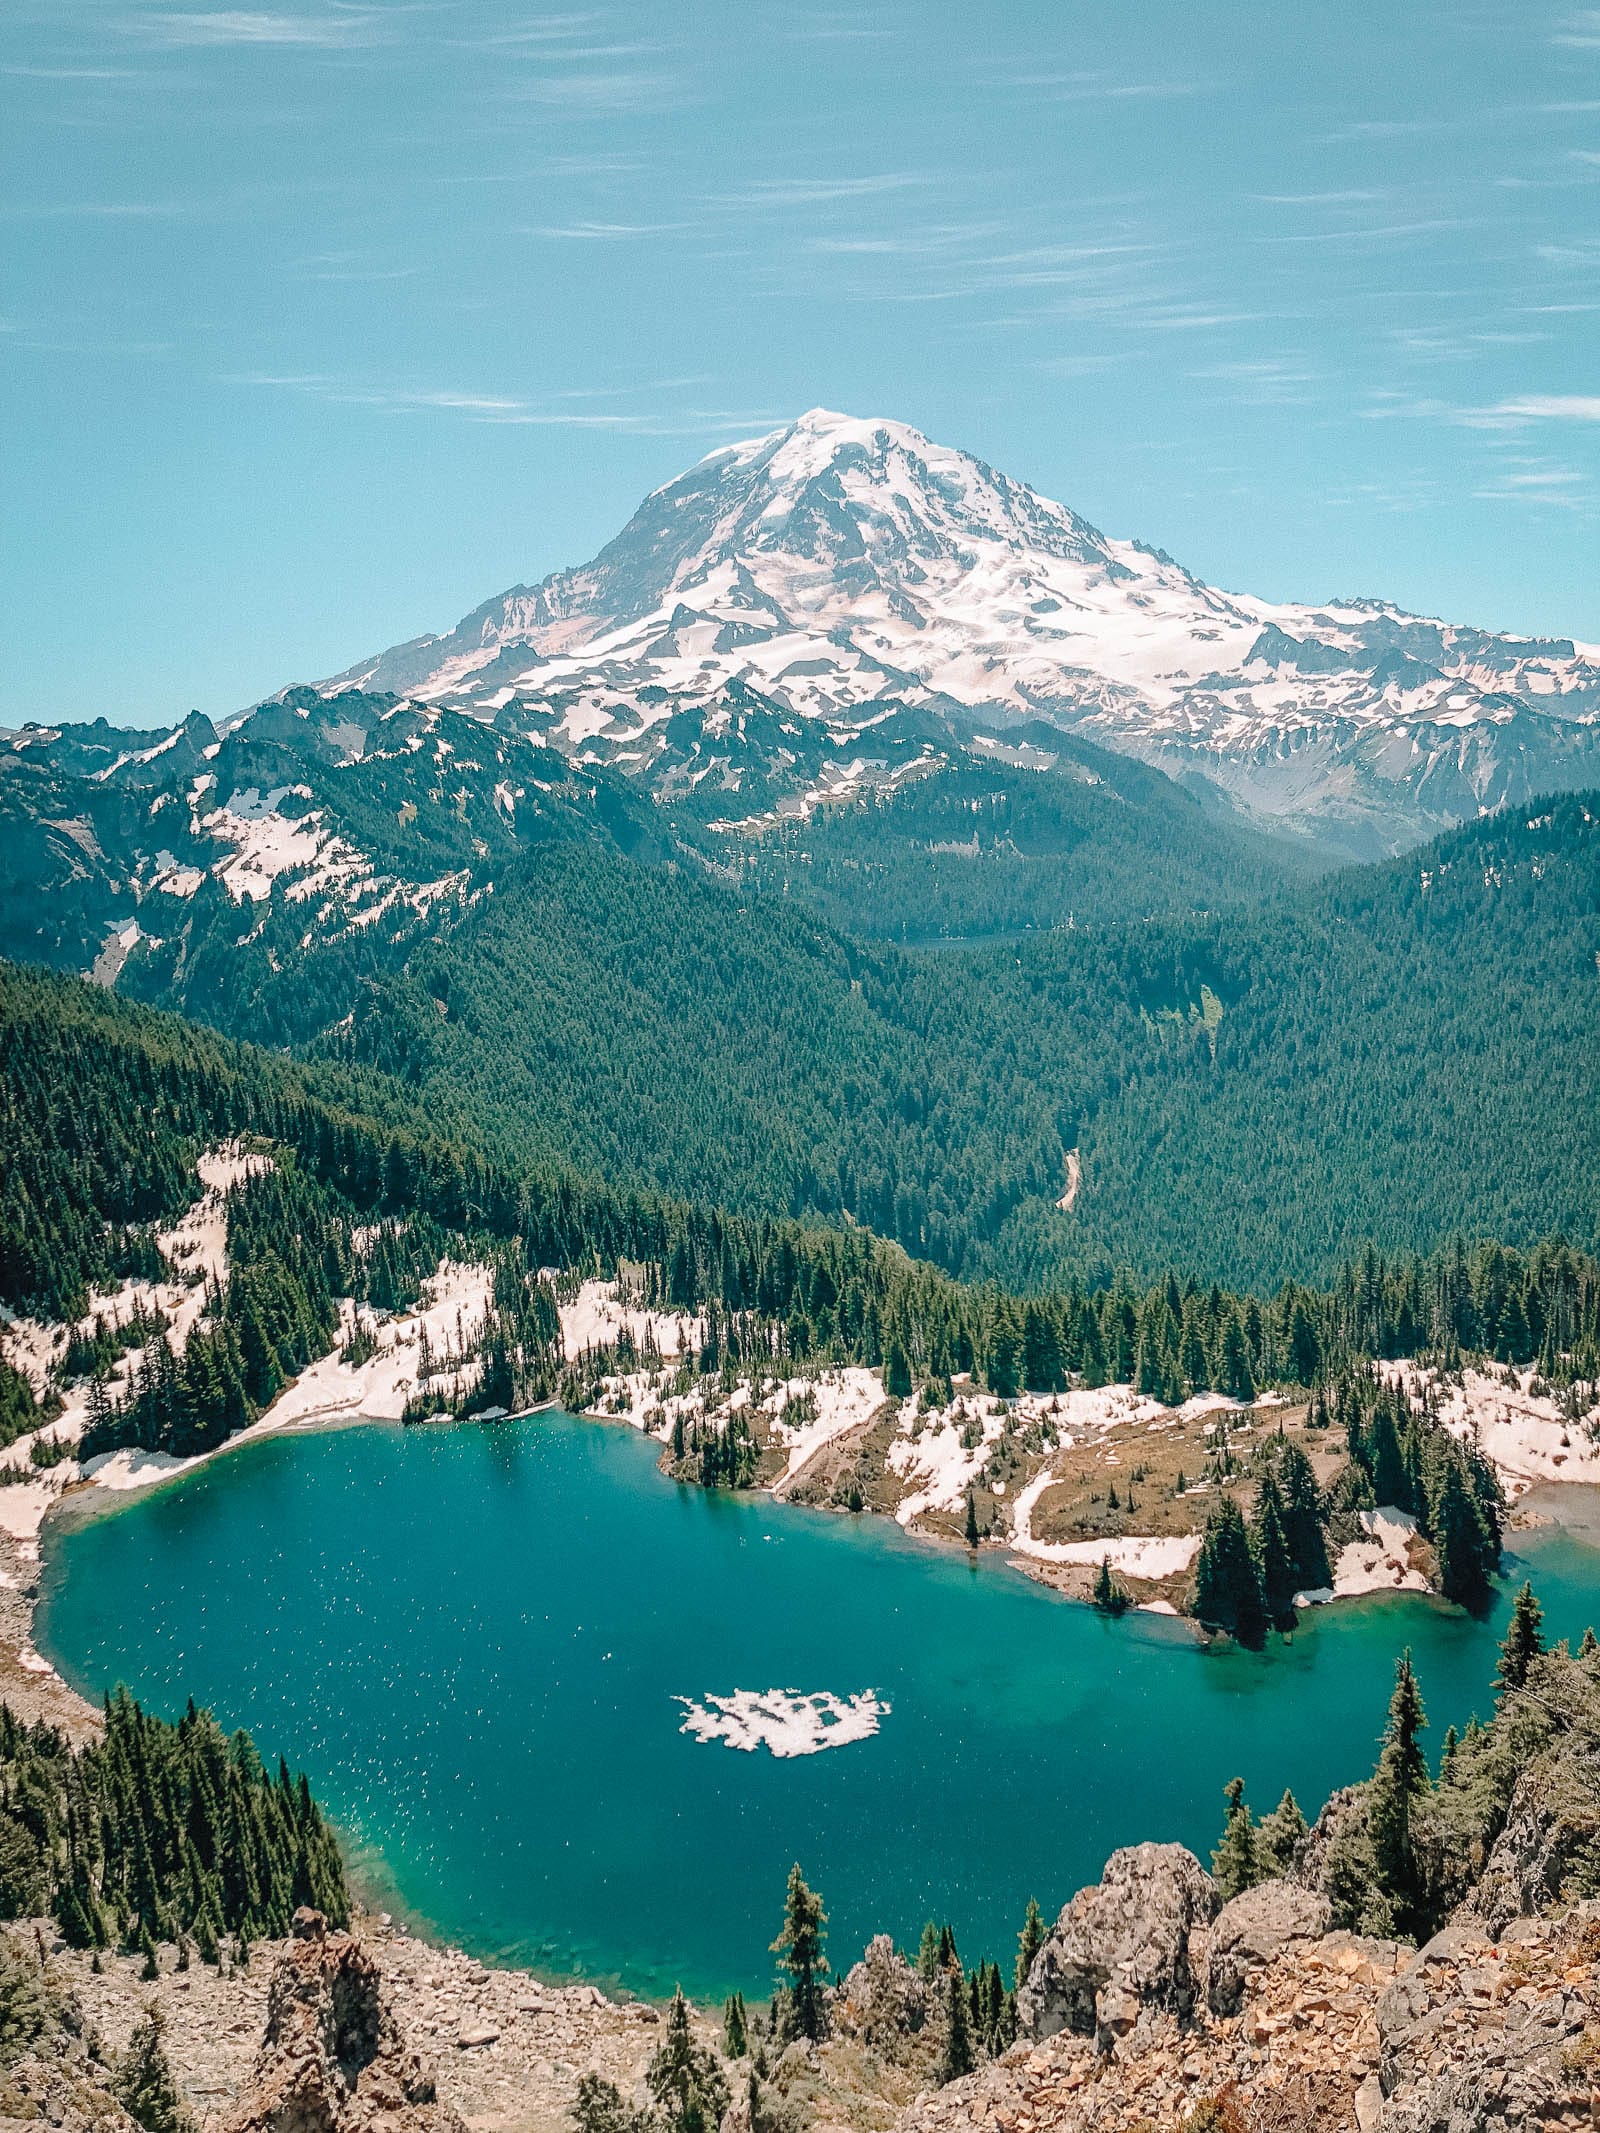 10 Best Hiking Trails In Washington State Full List Best Hike Guide - HanDLuggageOnly 10